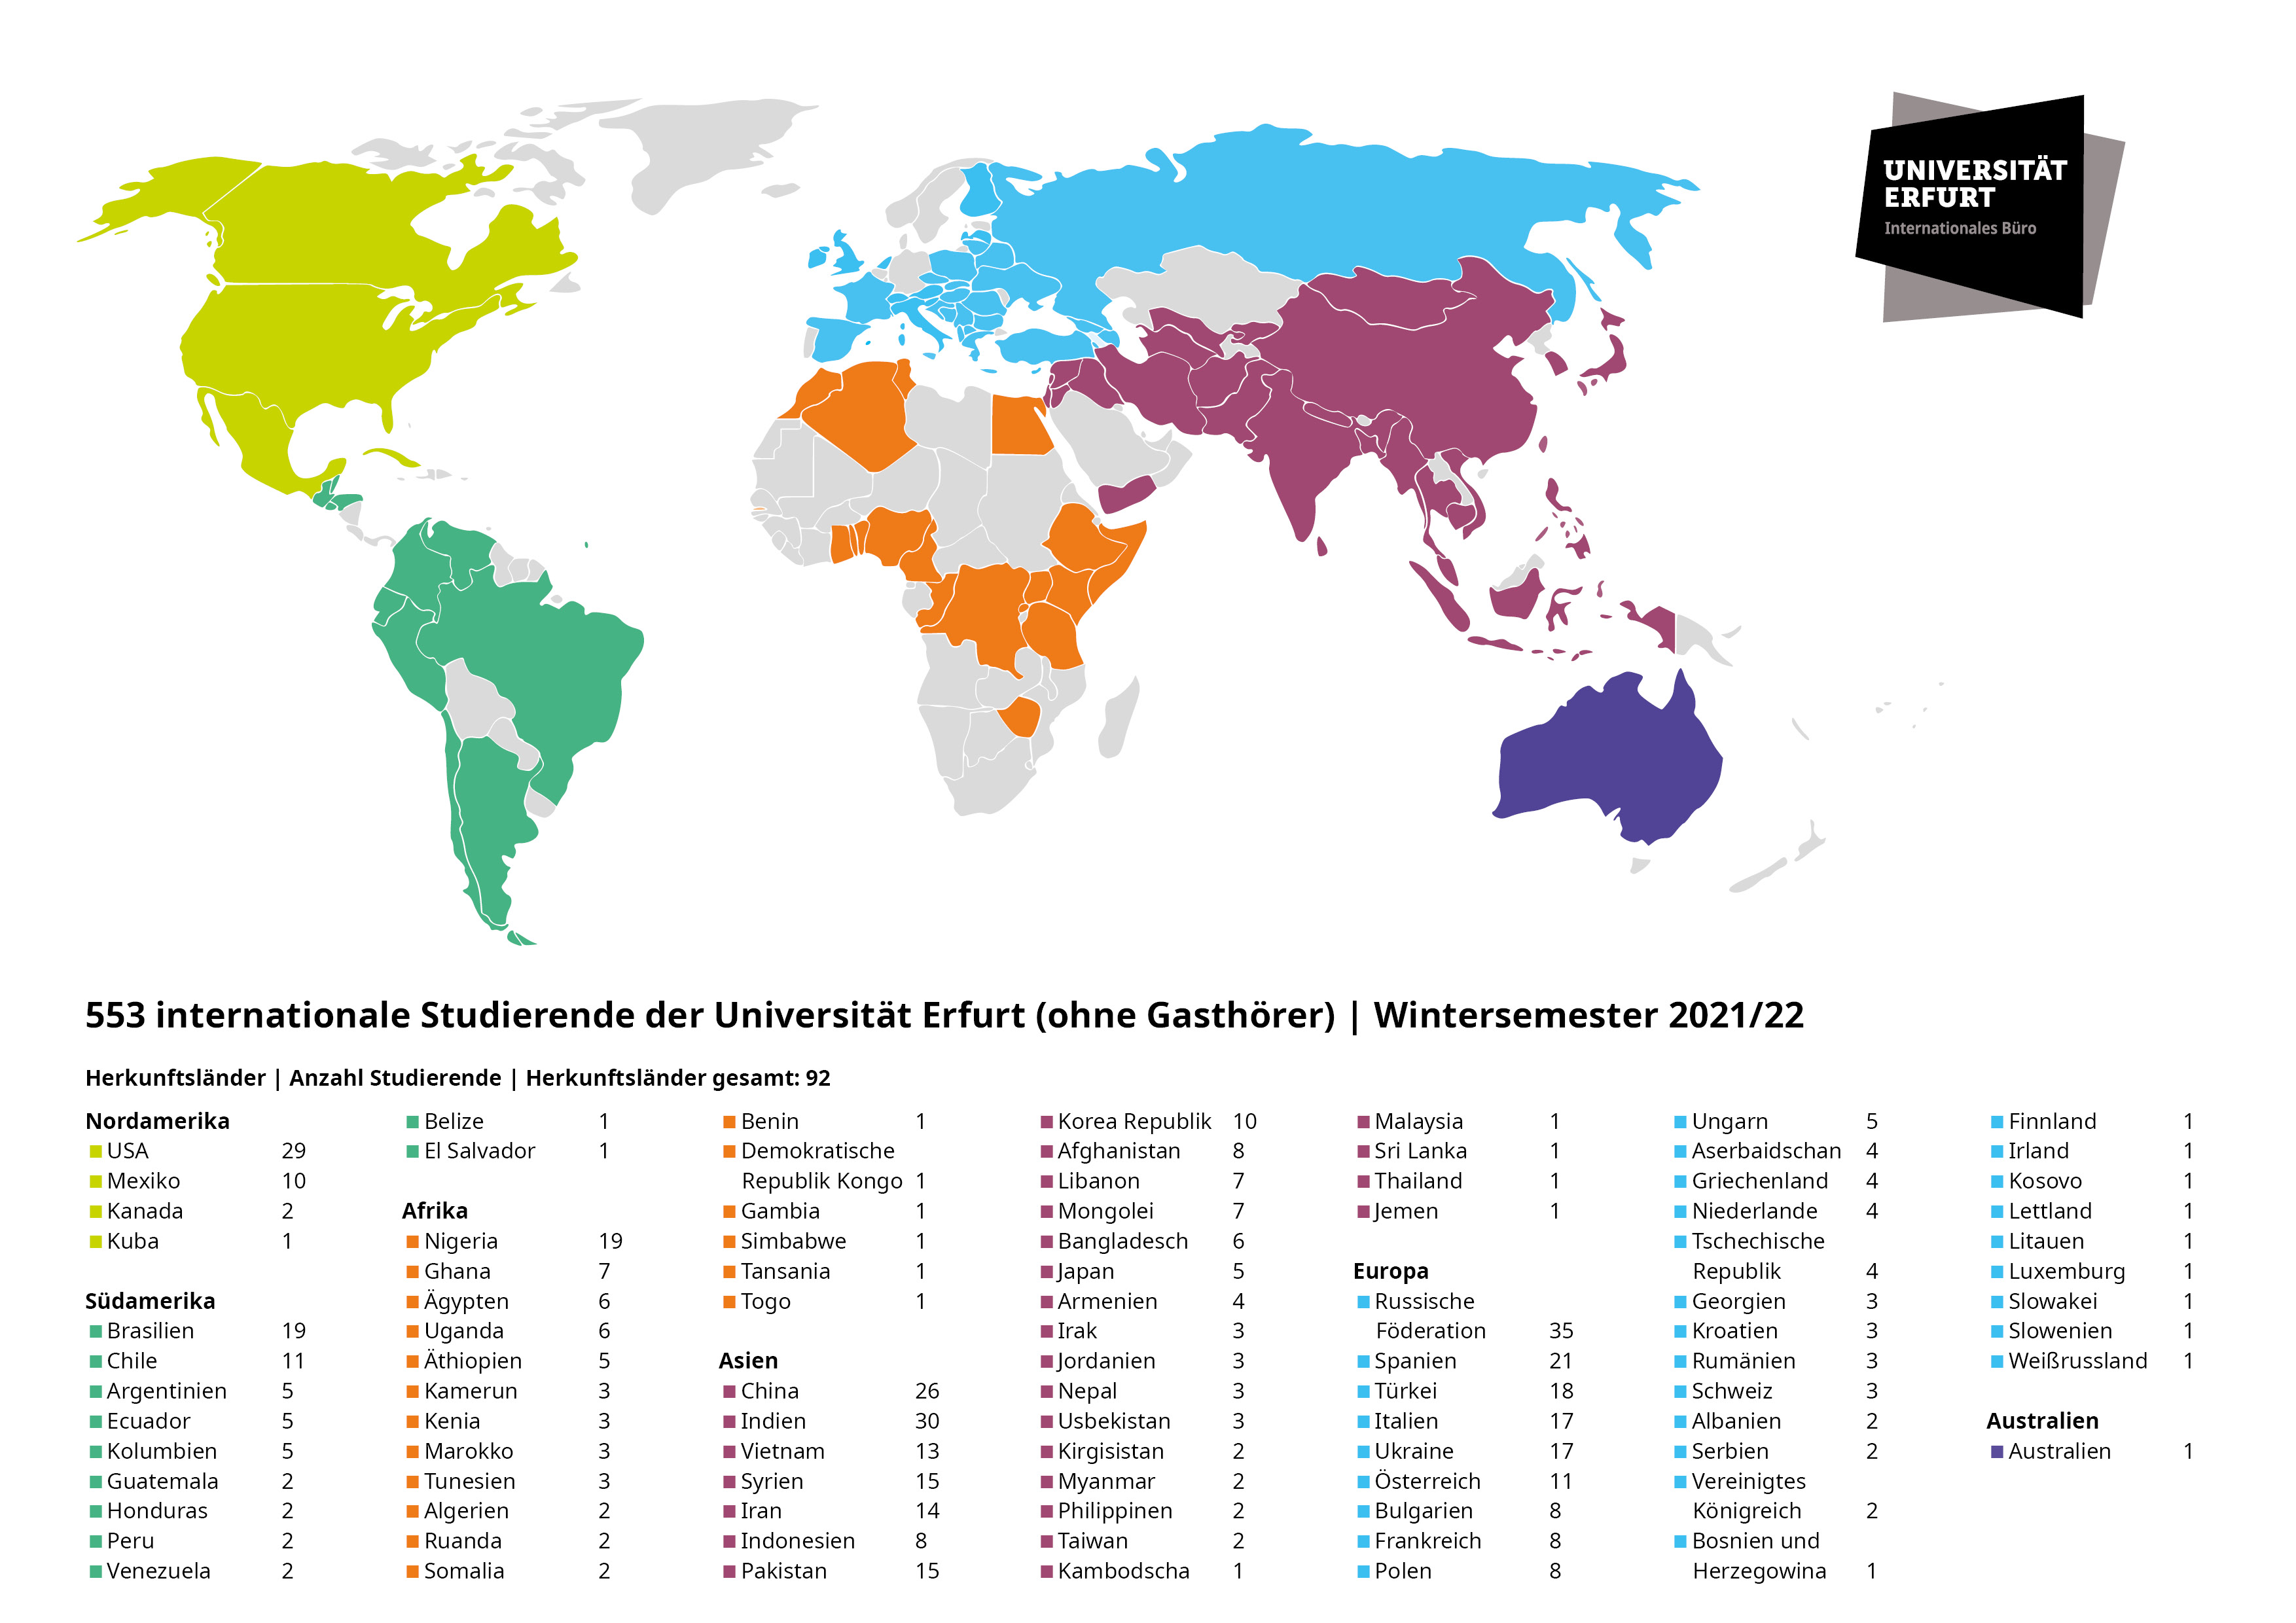 Map of international students at the University of Erfurt